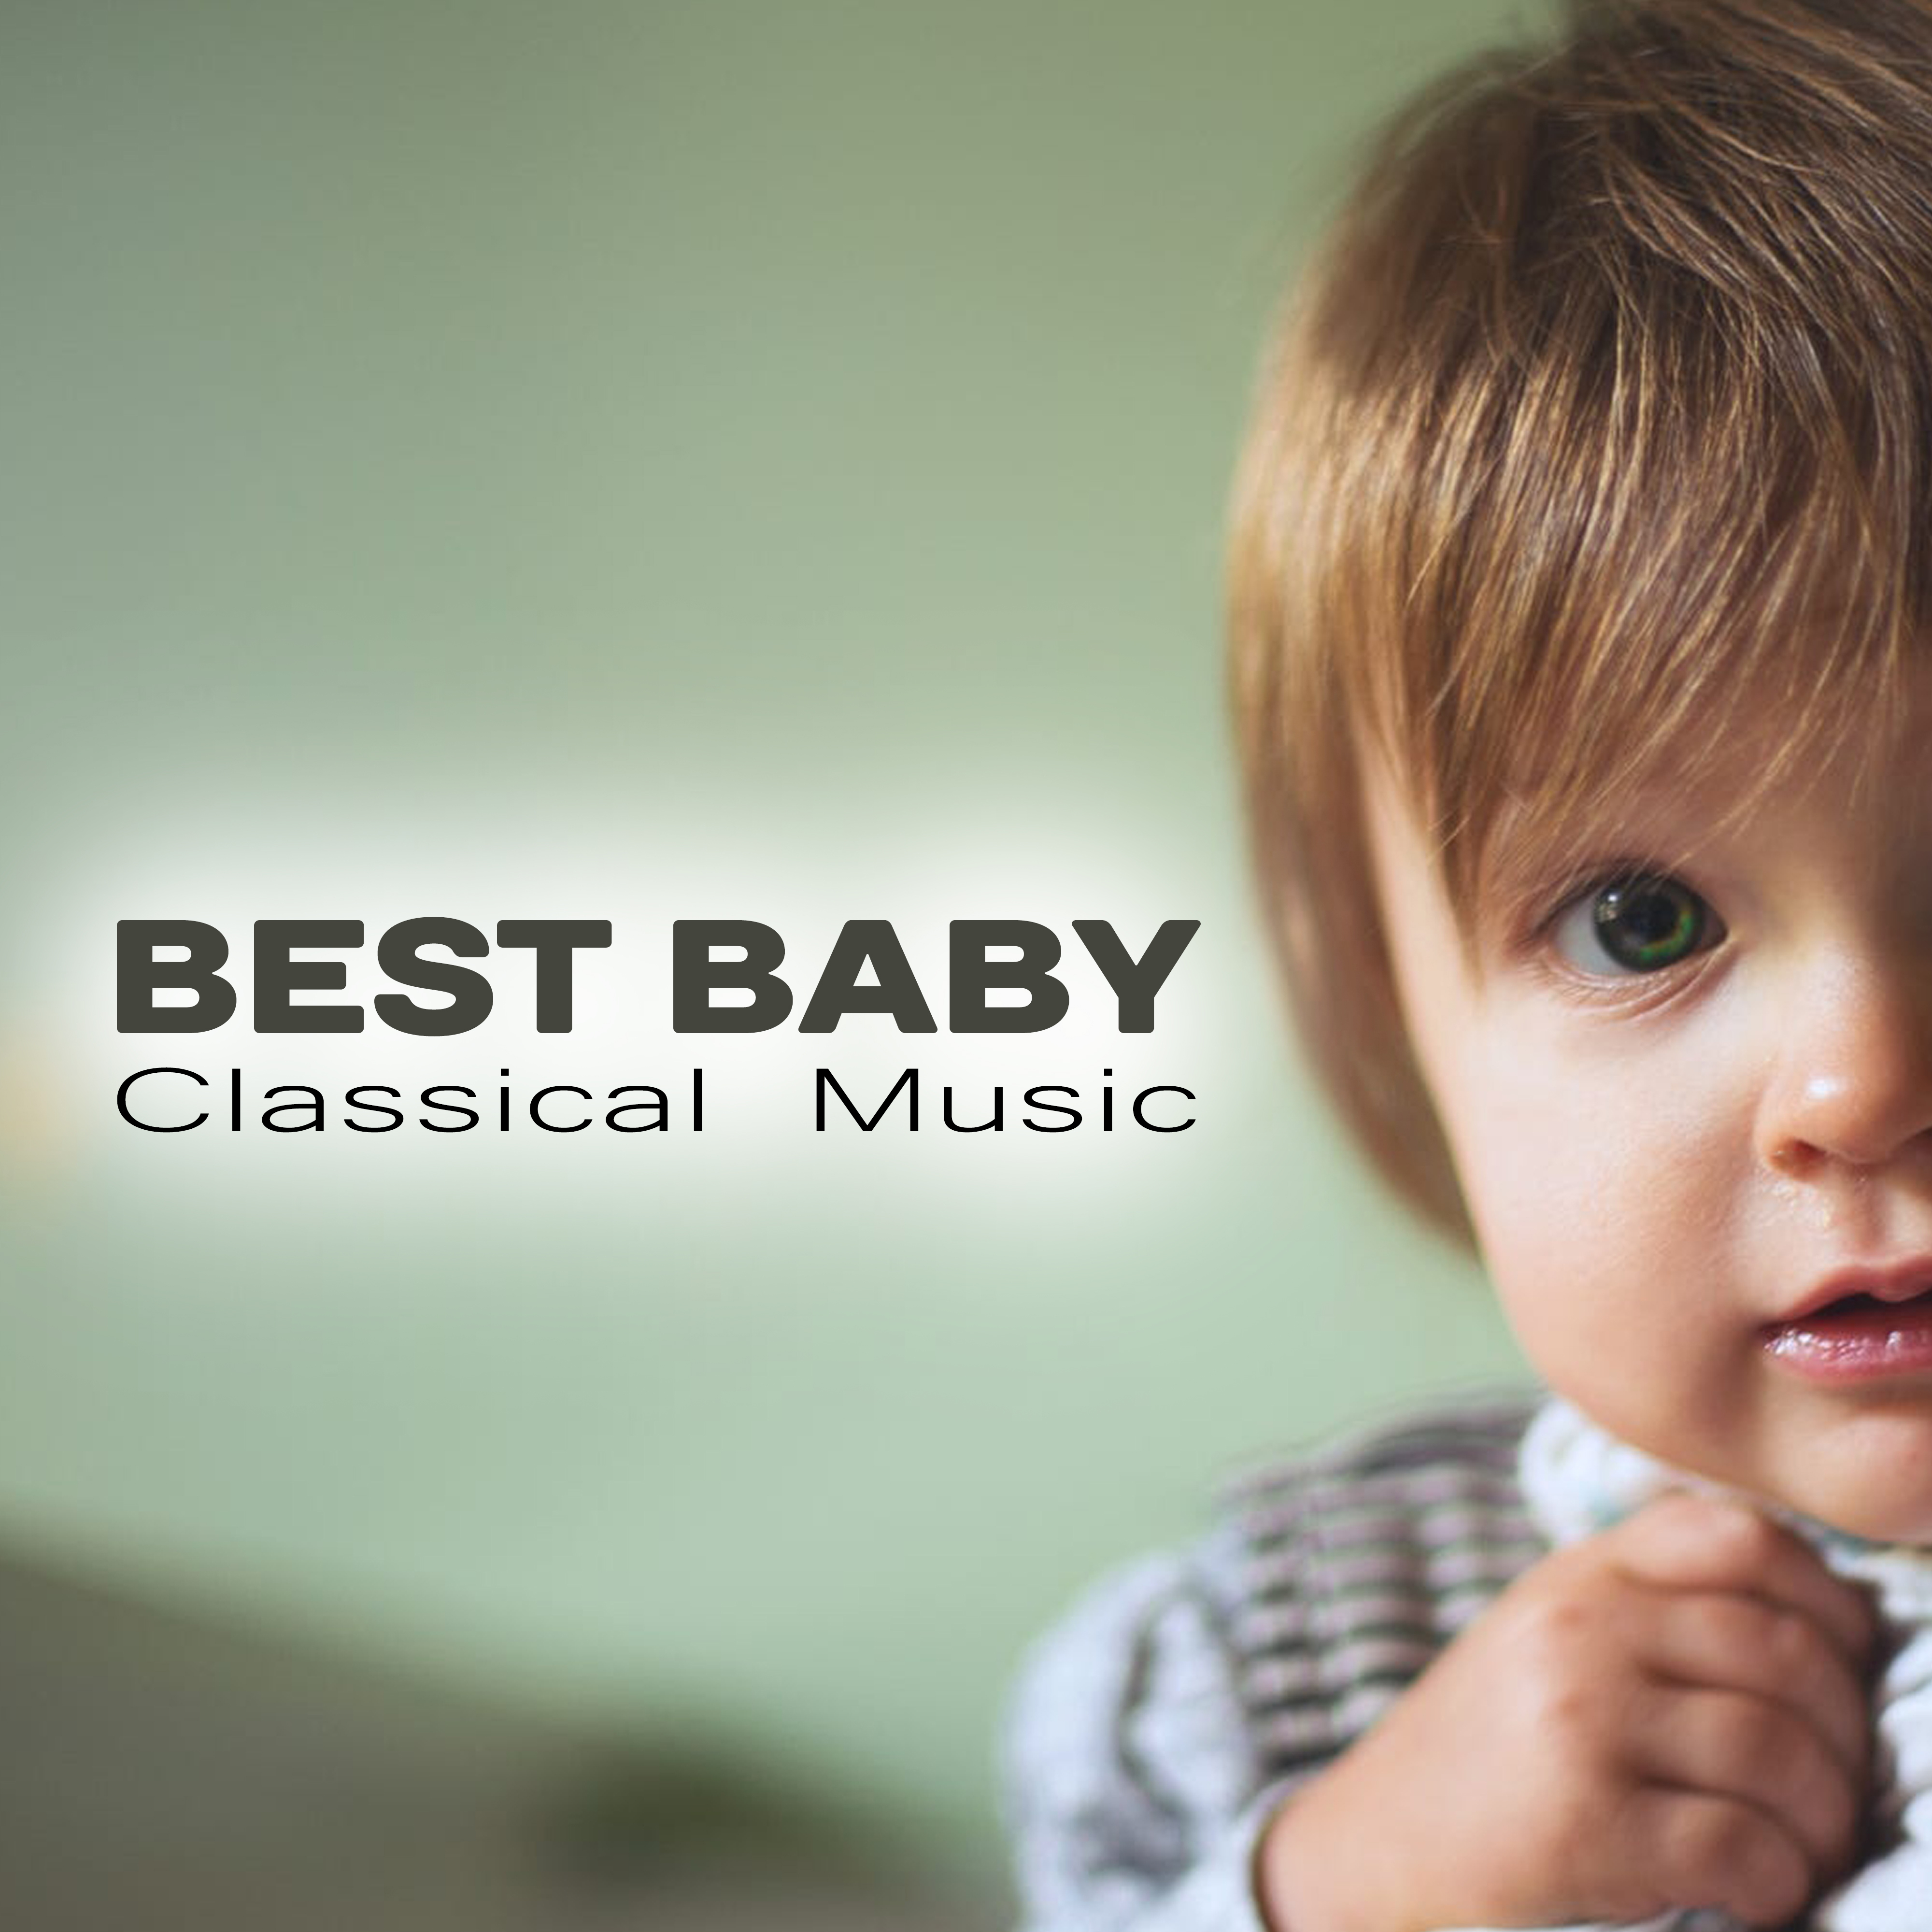 Best Baby Classical Music – Brain Development, Piano Music, Great Composers, Sounds for Baby